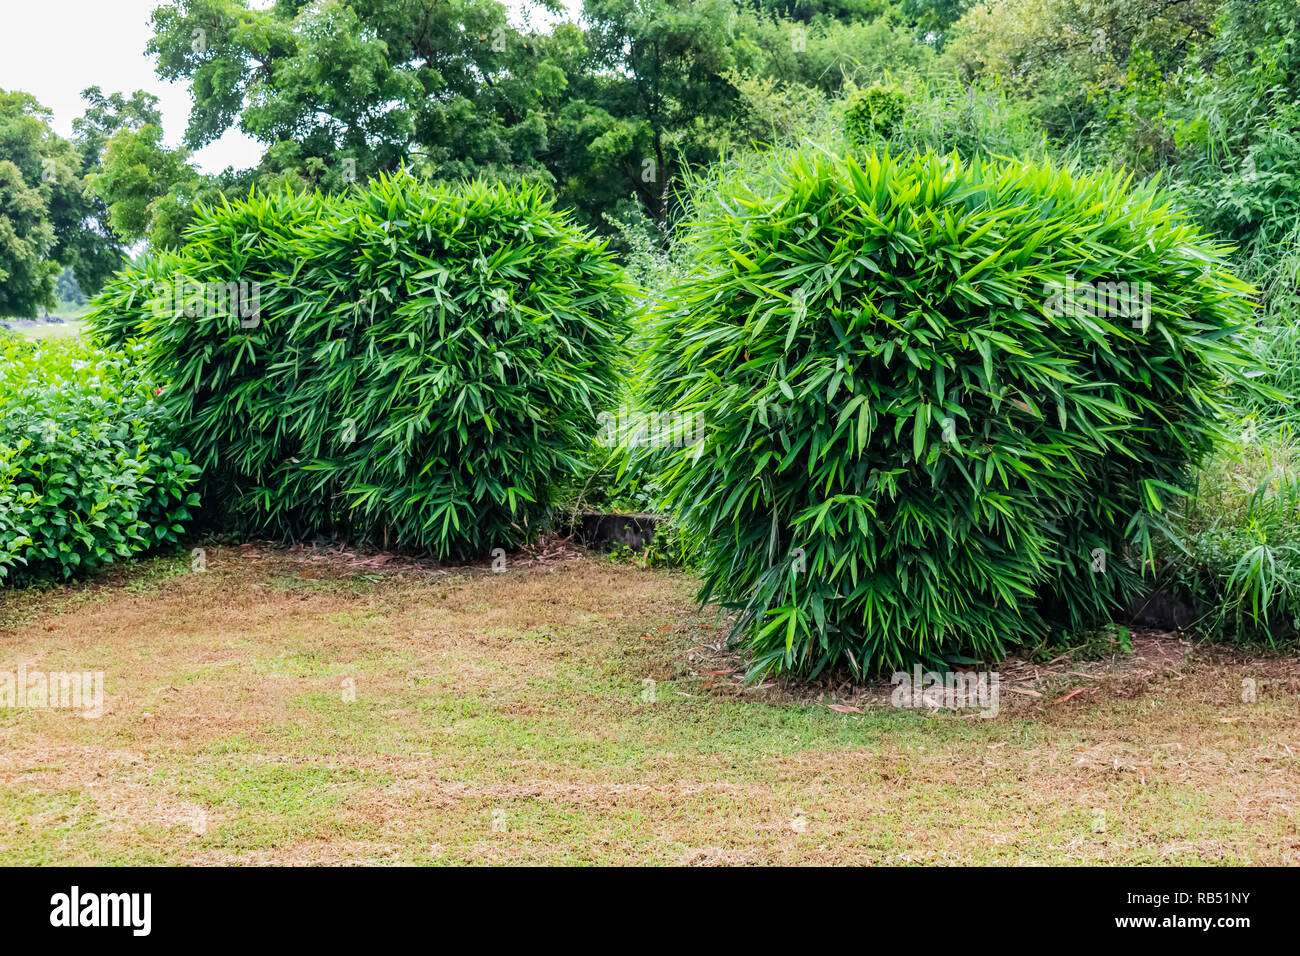 Close view of small Bamboo tree leafs shrubs & hibiscus tree shrubs in a greenery garden. Stock Photo